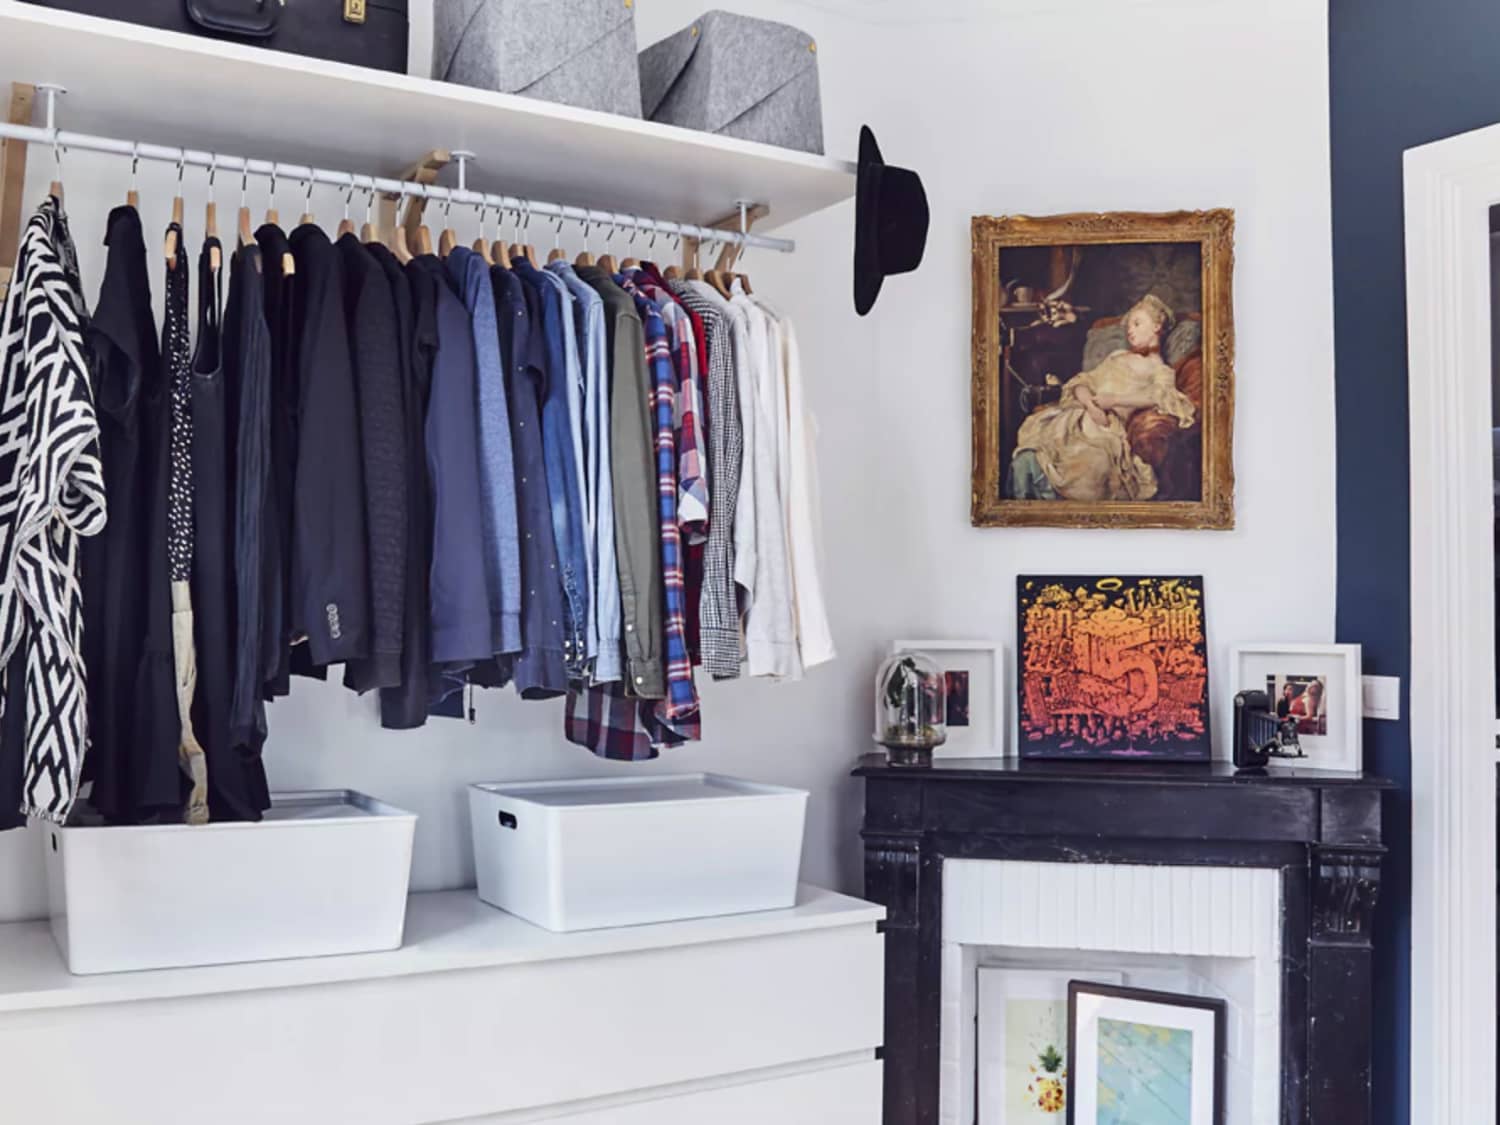 IKEA Storage Hacks for Homes That Need an Extra Closet